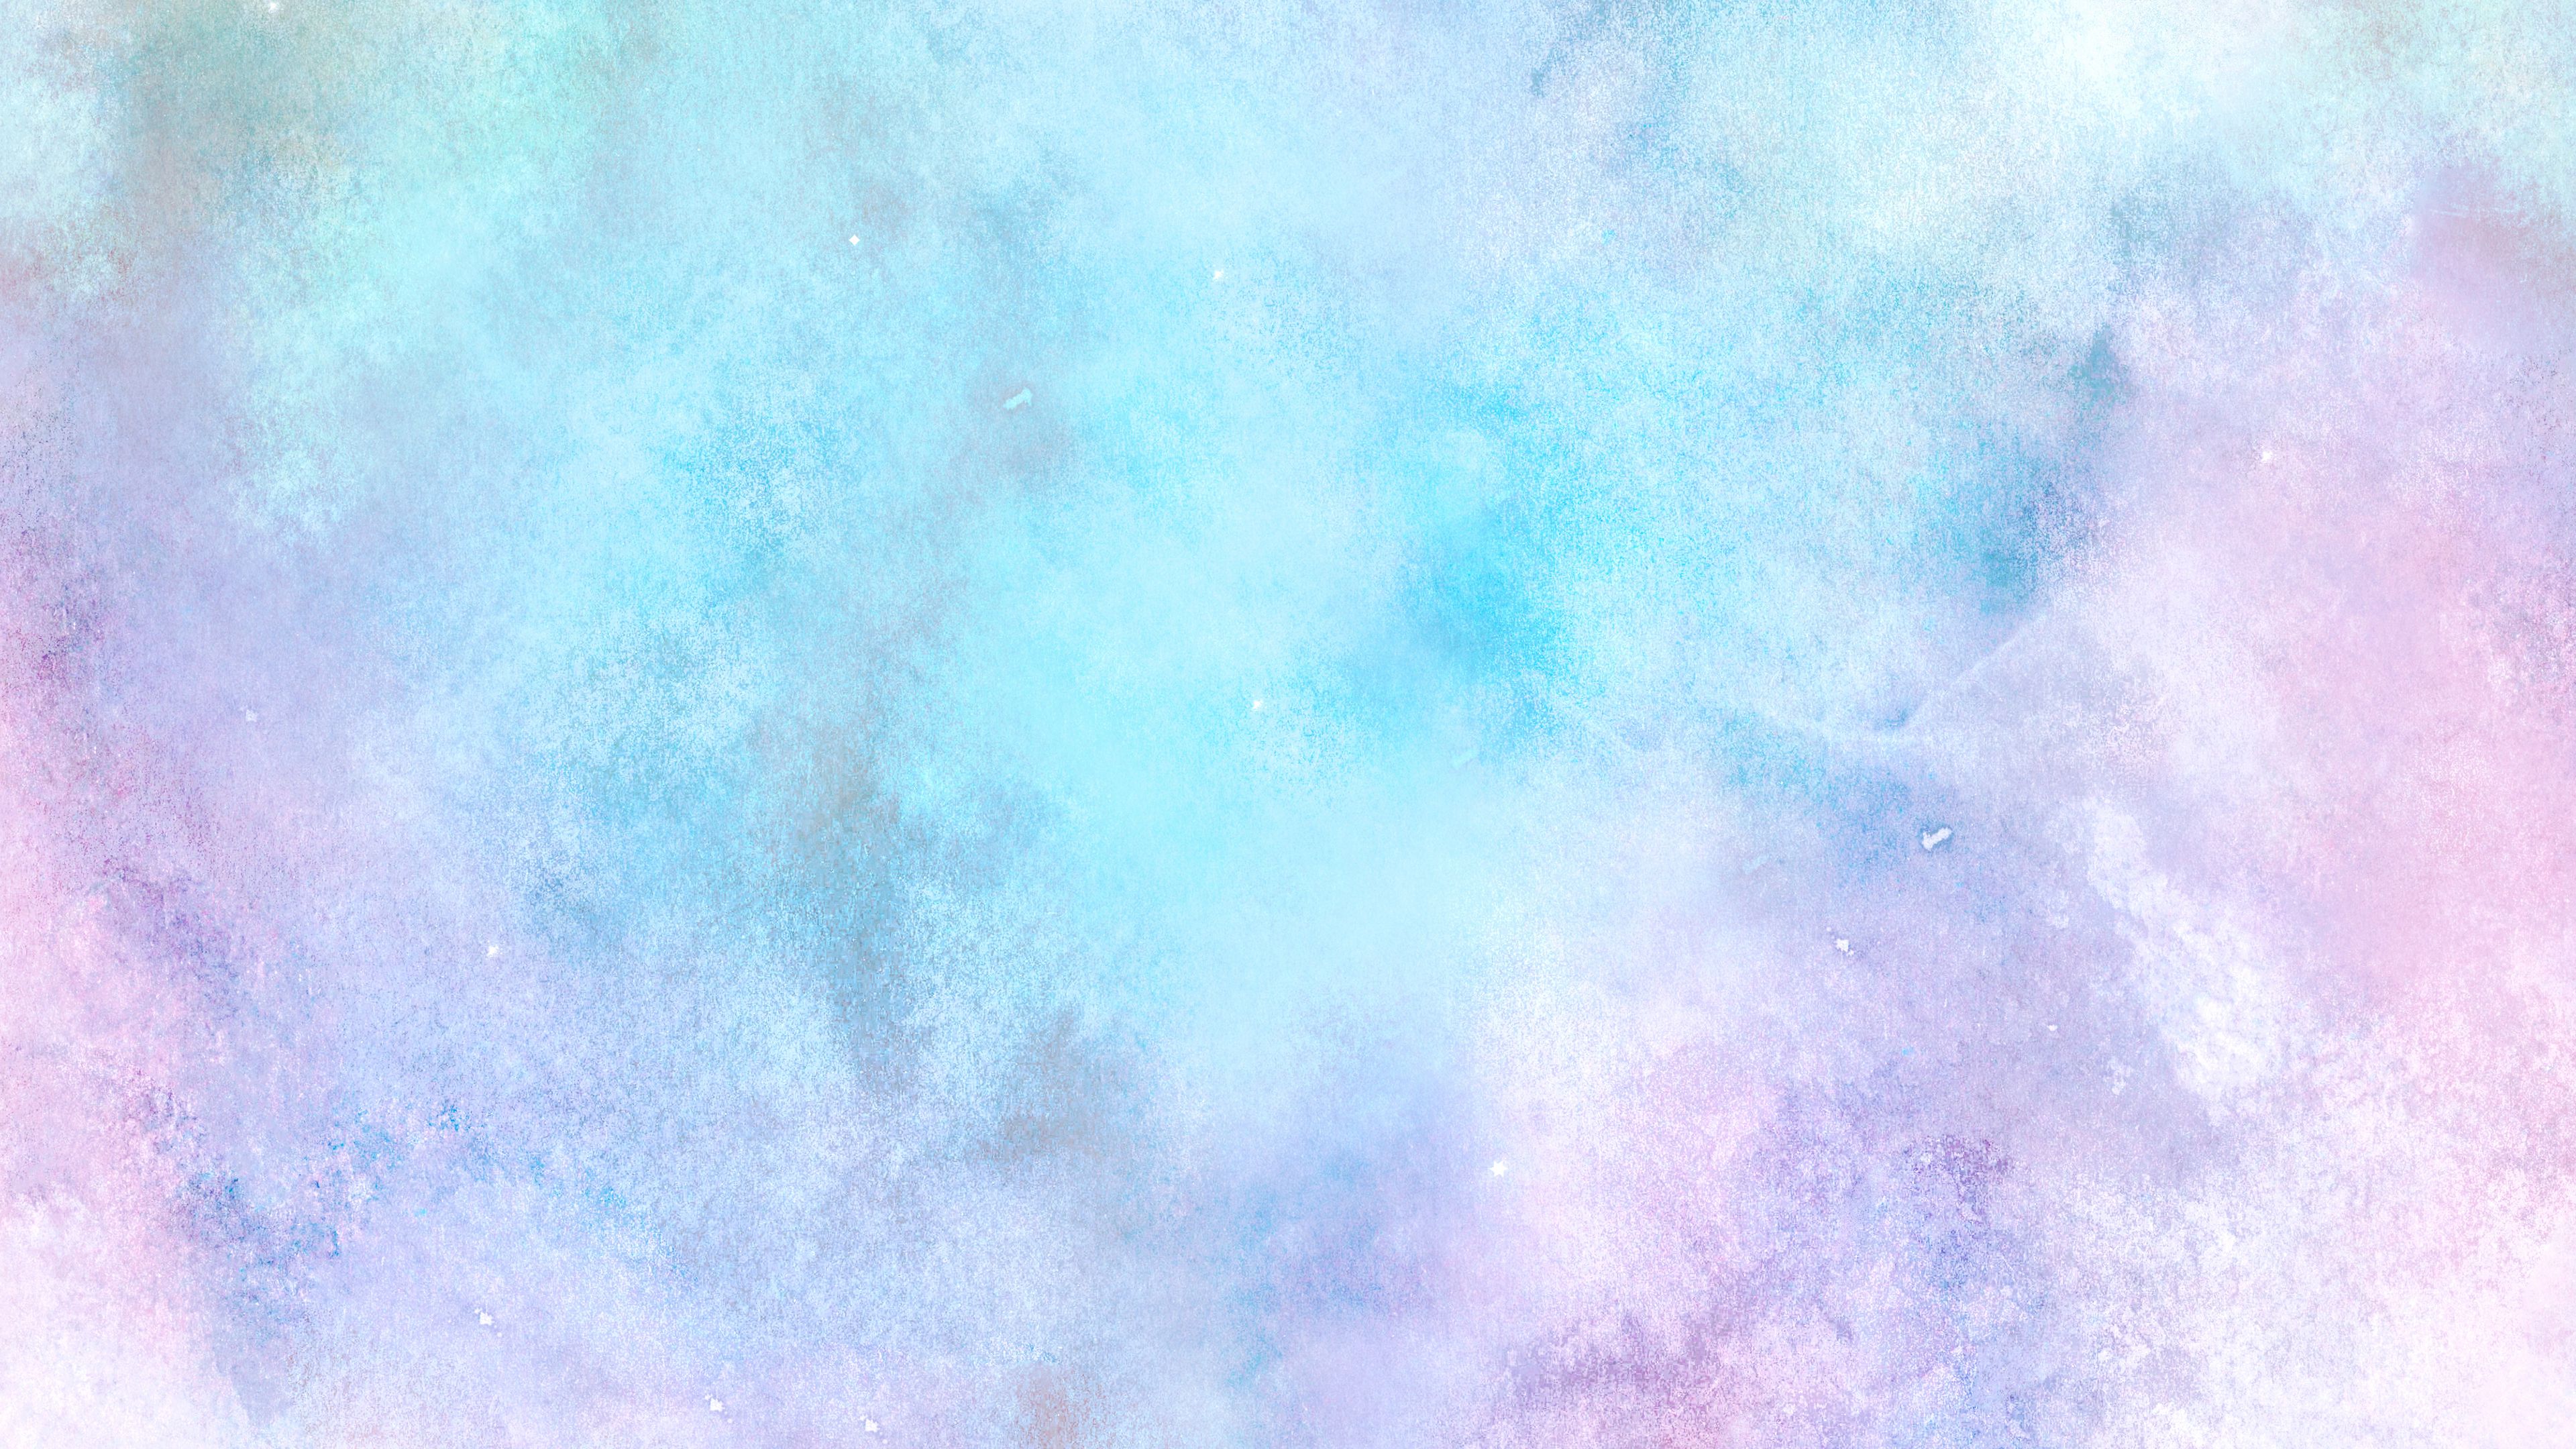 Download wallpaper 3840x2160 watercolor, paint, stains, abstraction, gentle  4k uhd 16:9 hd background